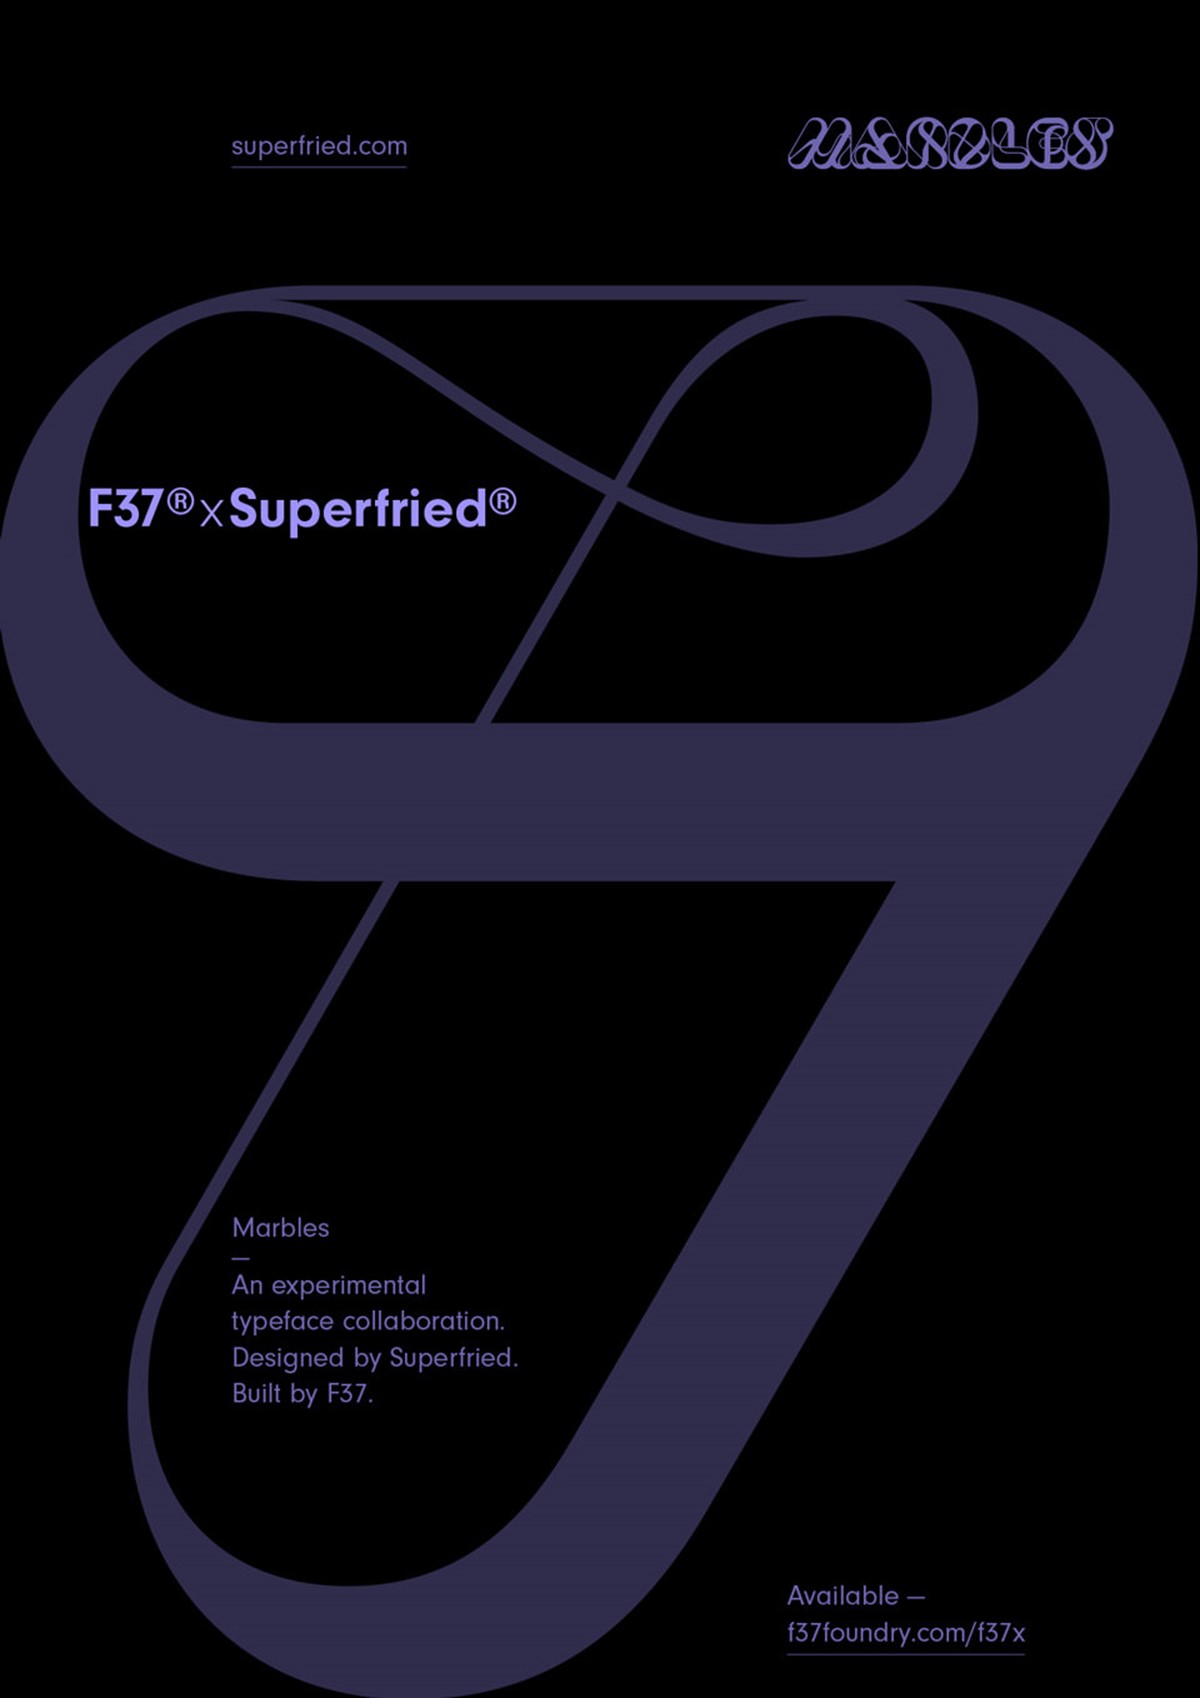 Marbles – An experimental typeface collaboration. Designed by Superfried. Built by F37. Manchester. Number 7 poster.